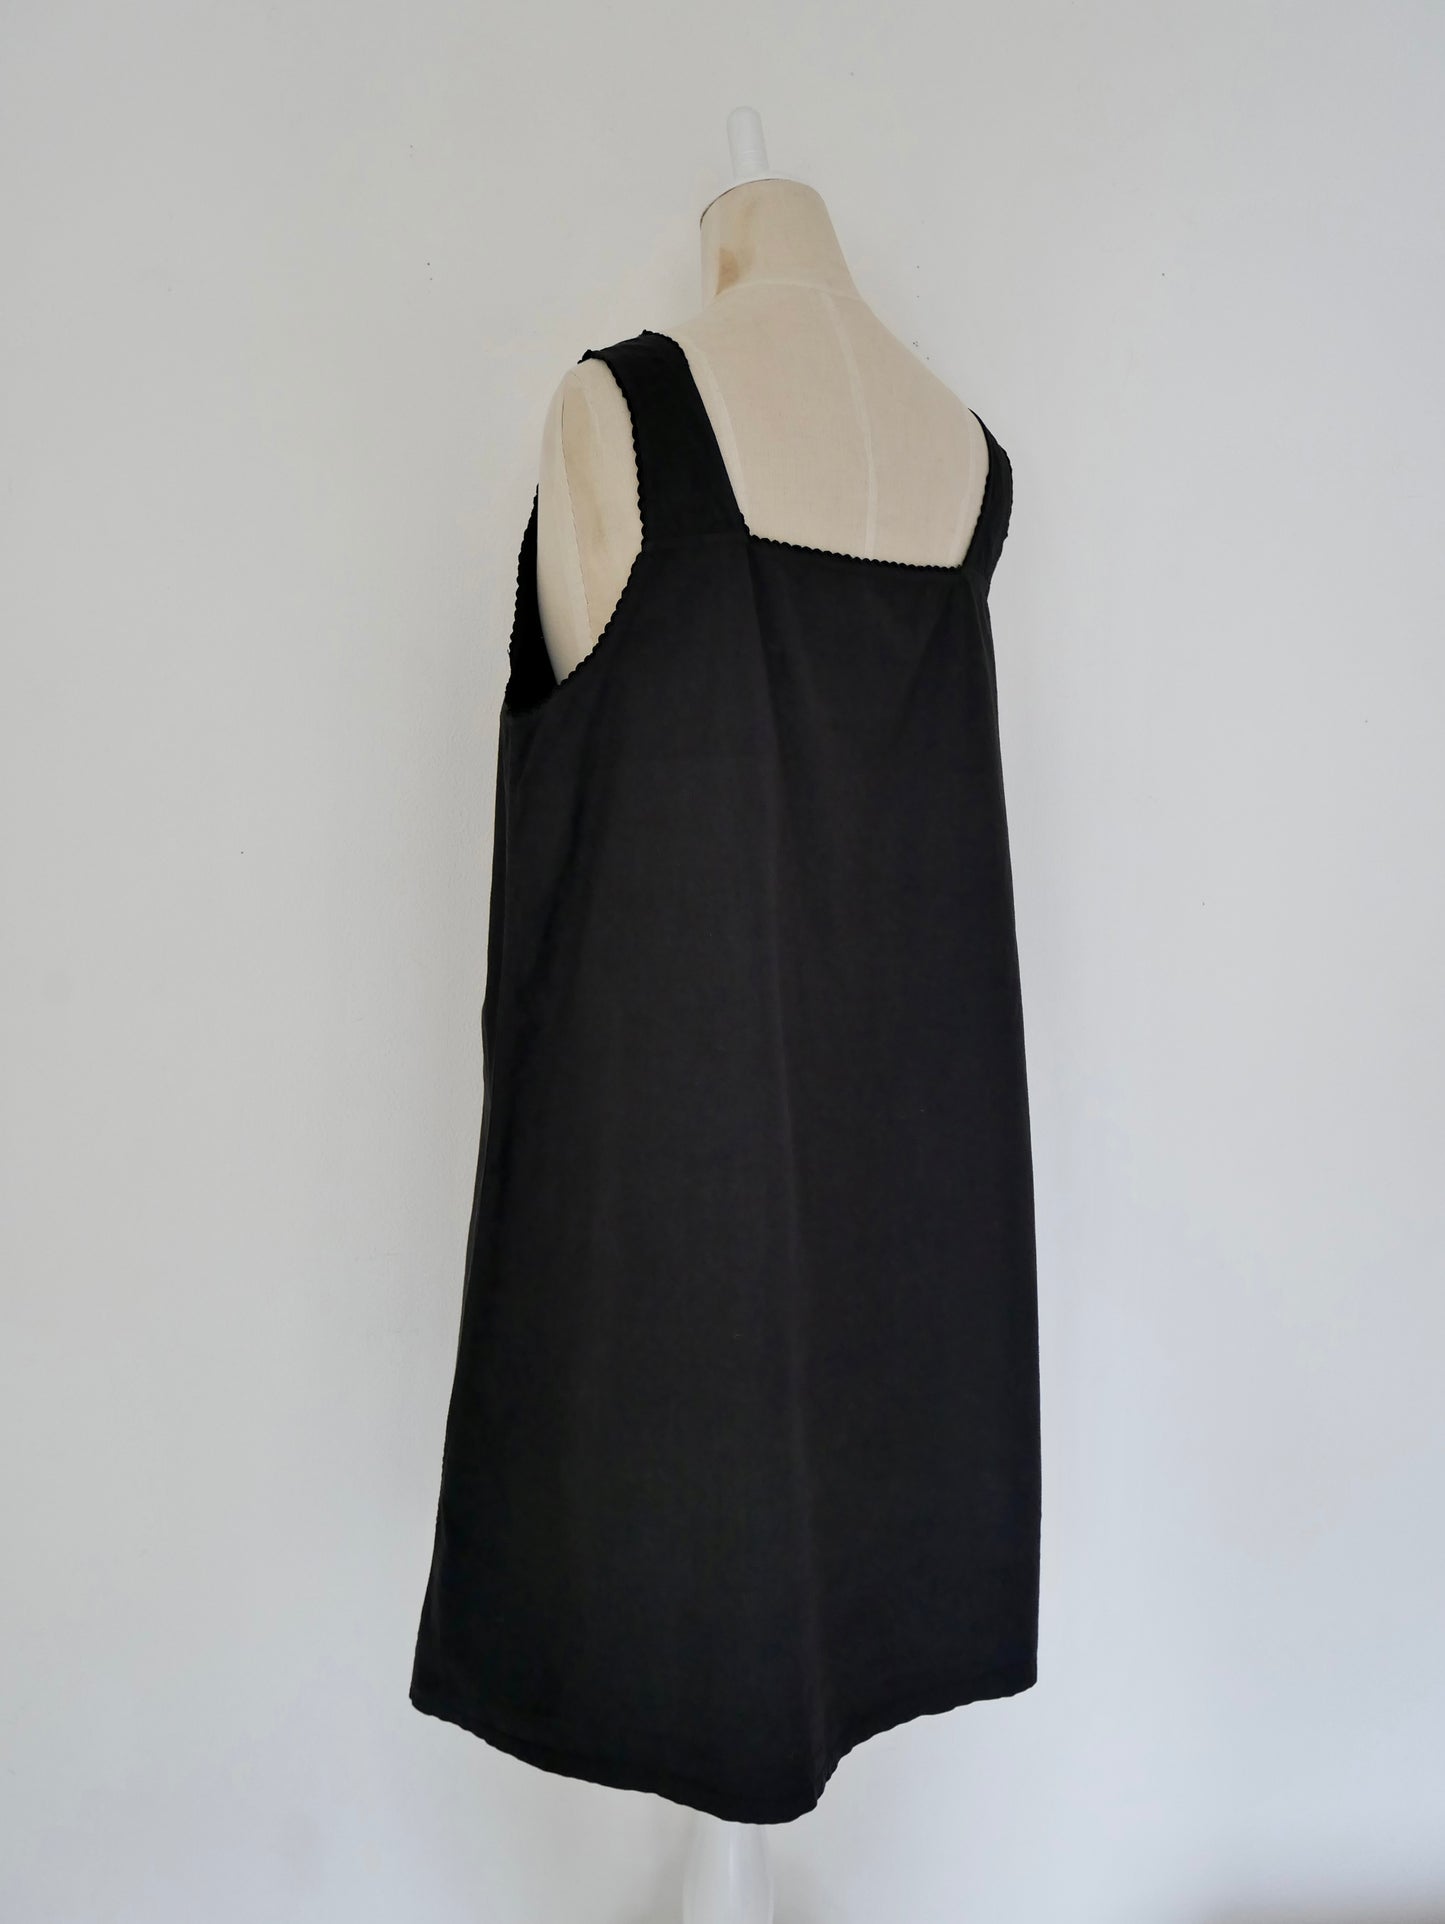 French Antique Cotton Dress #1 / Black Dyed